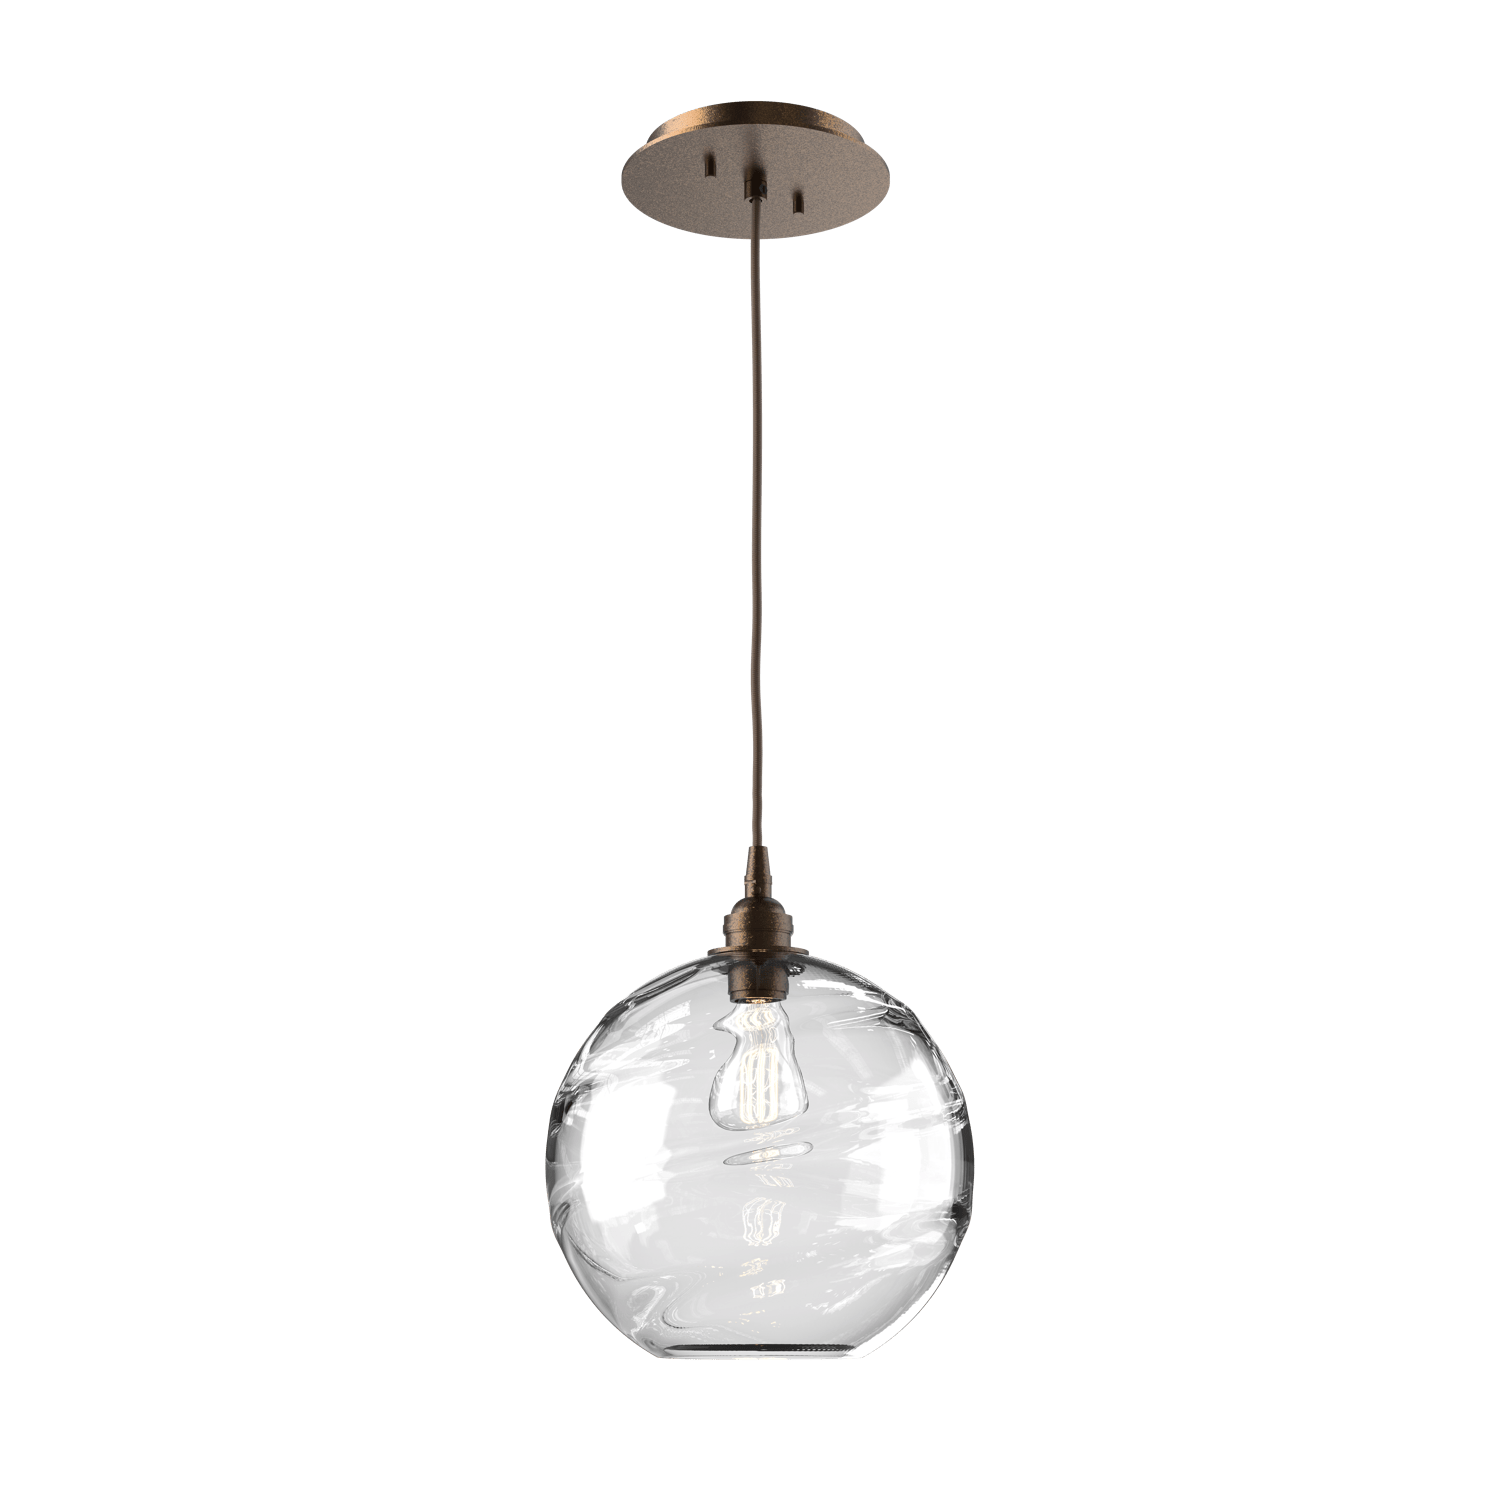 LAB0047-01-FB-OC-Hammerton-Studio-Optic-Blown-Glass-Terra-pendant-light-with-flat-bronze-finish-and-optic-clear-blown-glass-shades-and-incandescent-lamping